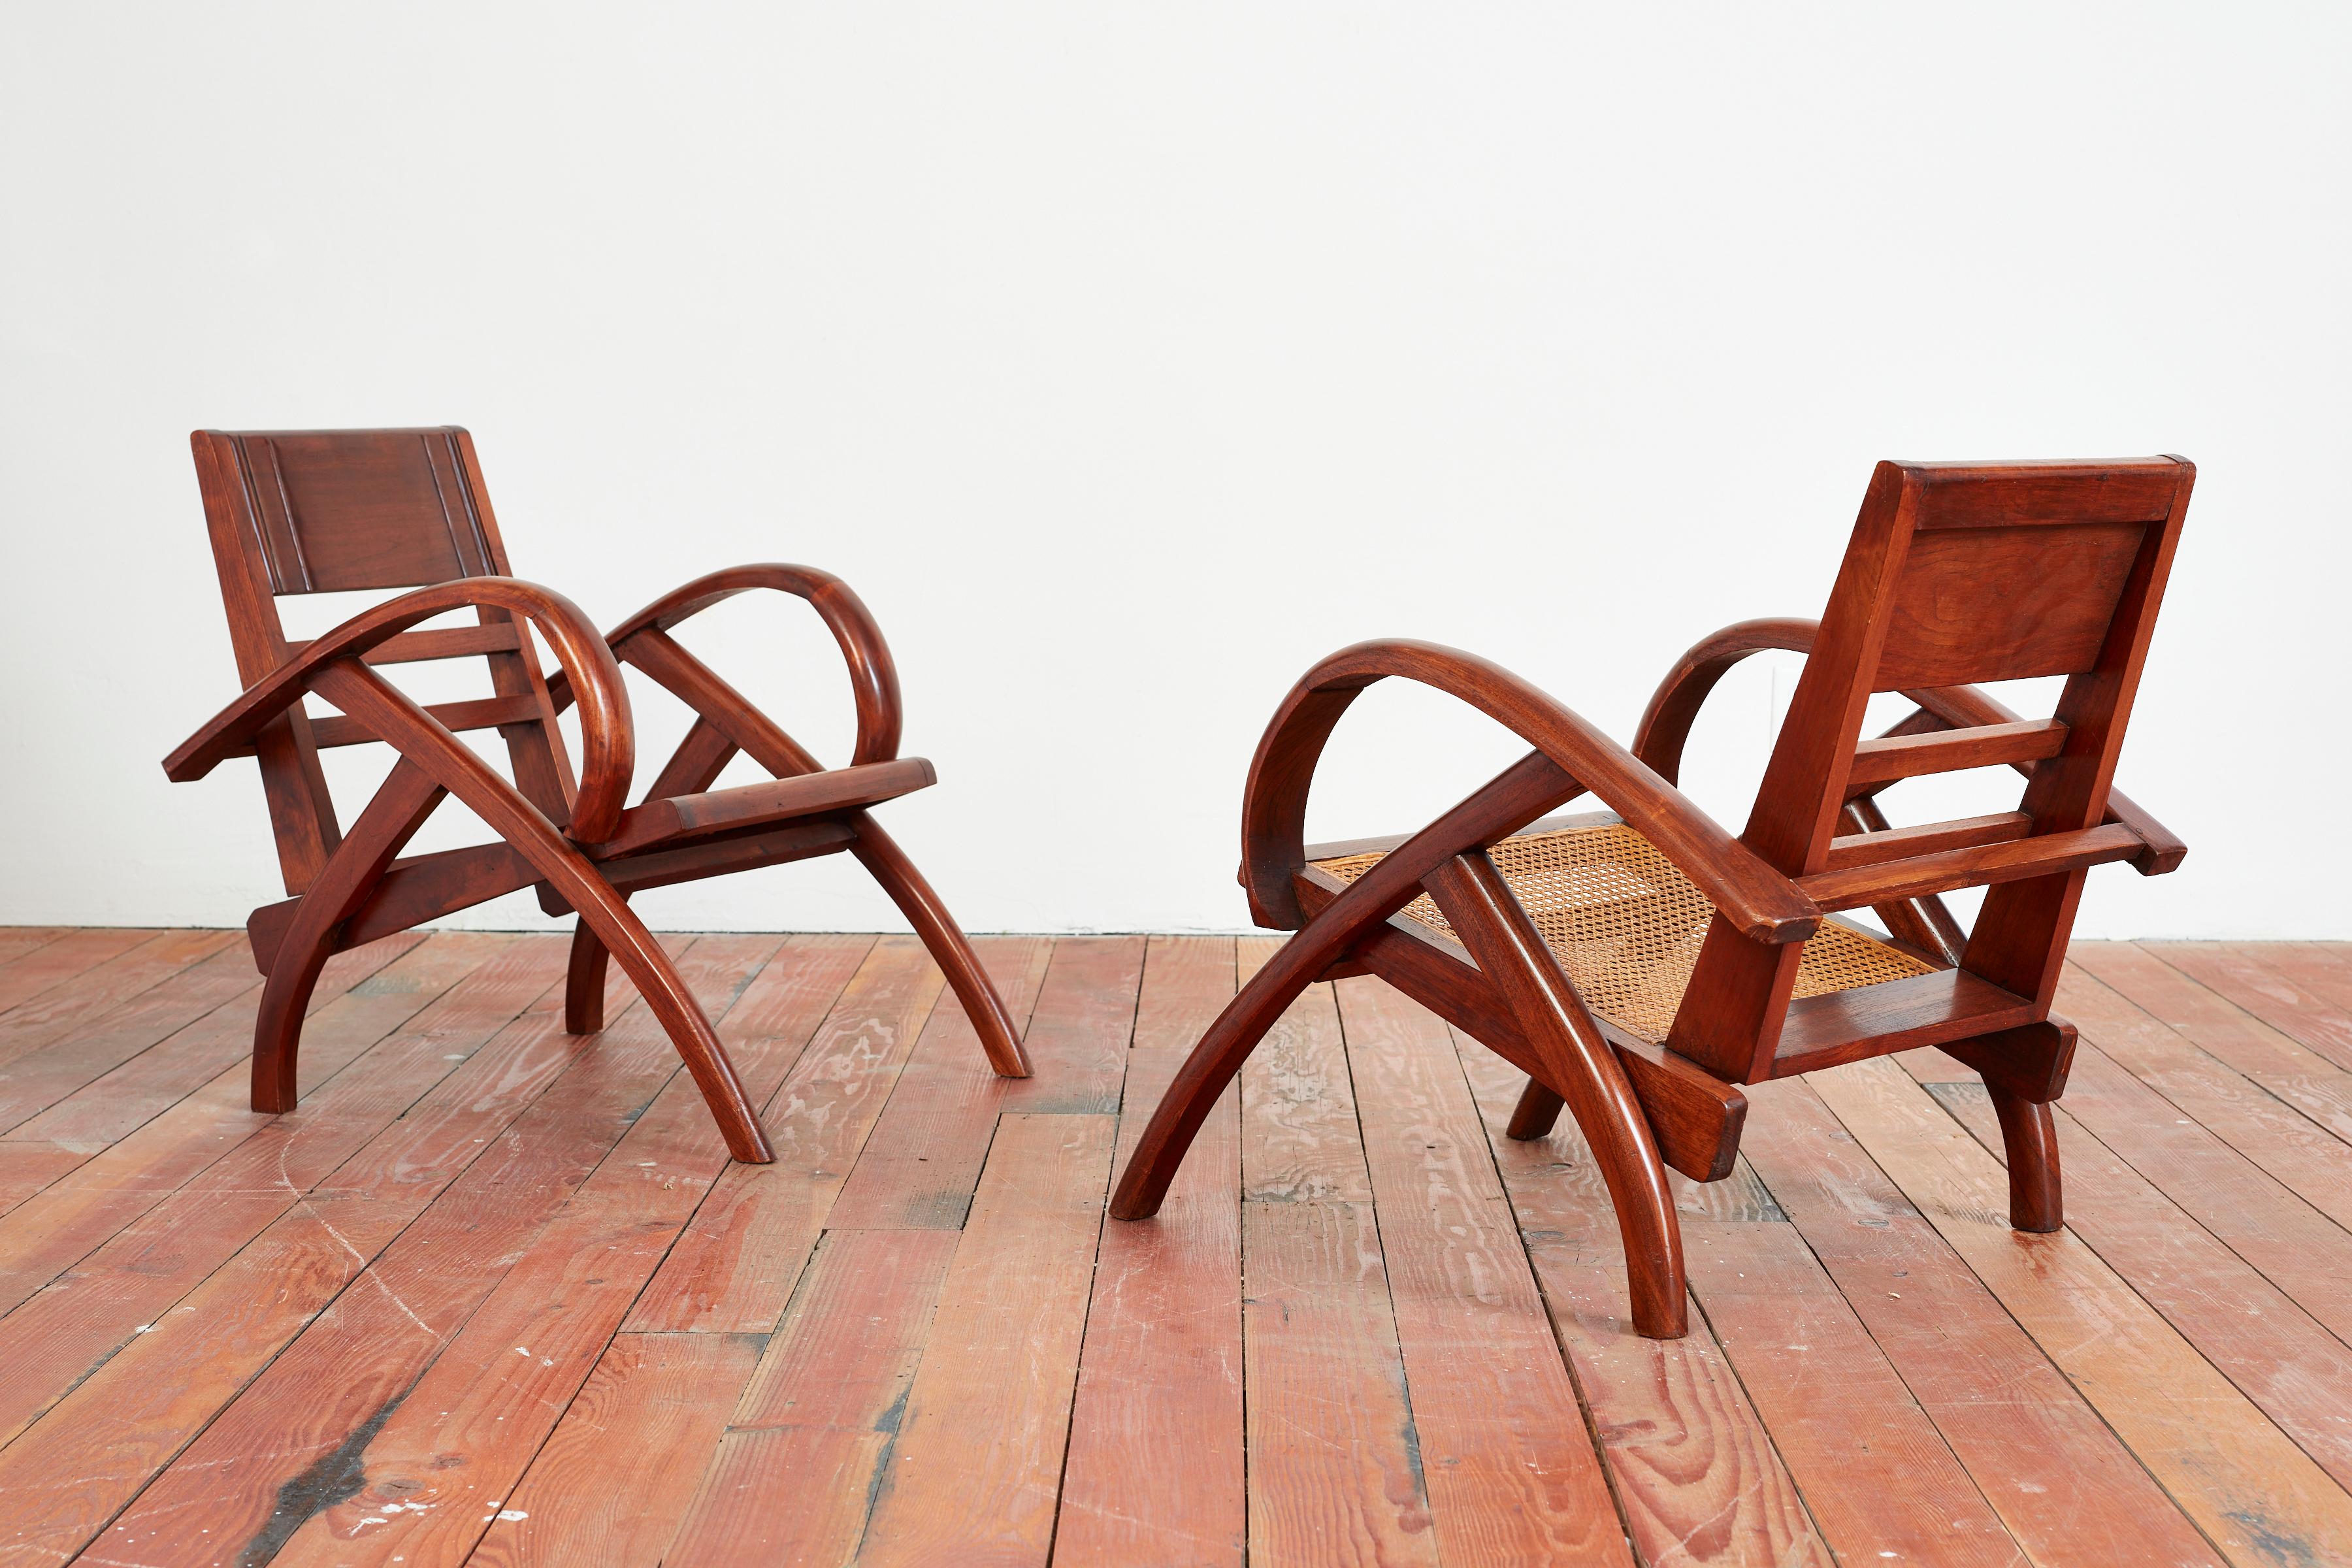 Unique pair of French caned folding chairs with sculptural lines and wonderful patina.
Caned seat with seatback that folds forward to rest on seat 
France, circa 1950s.